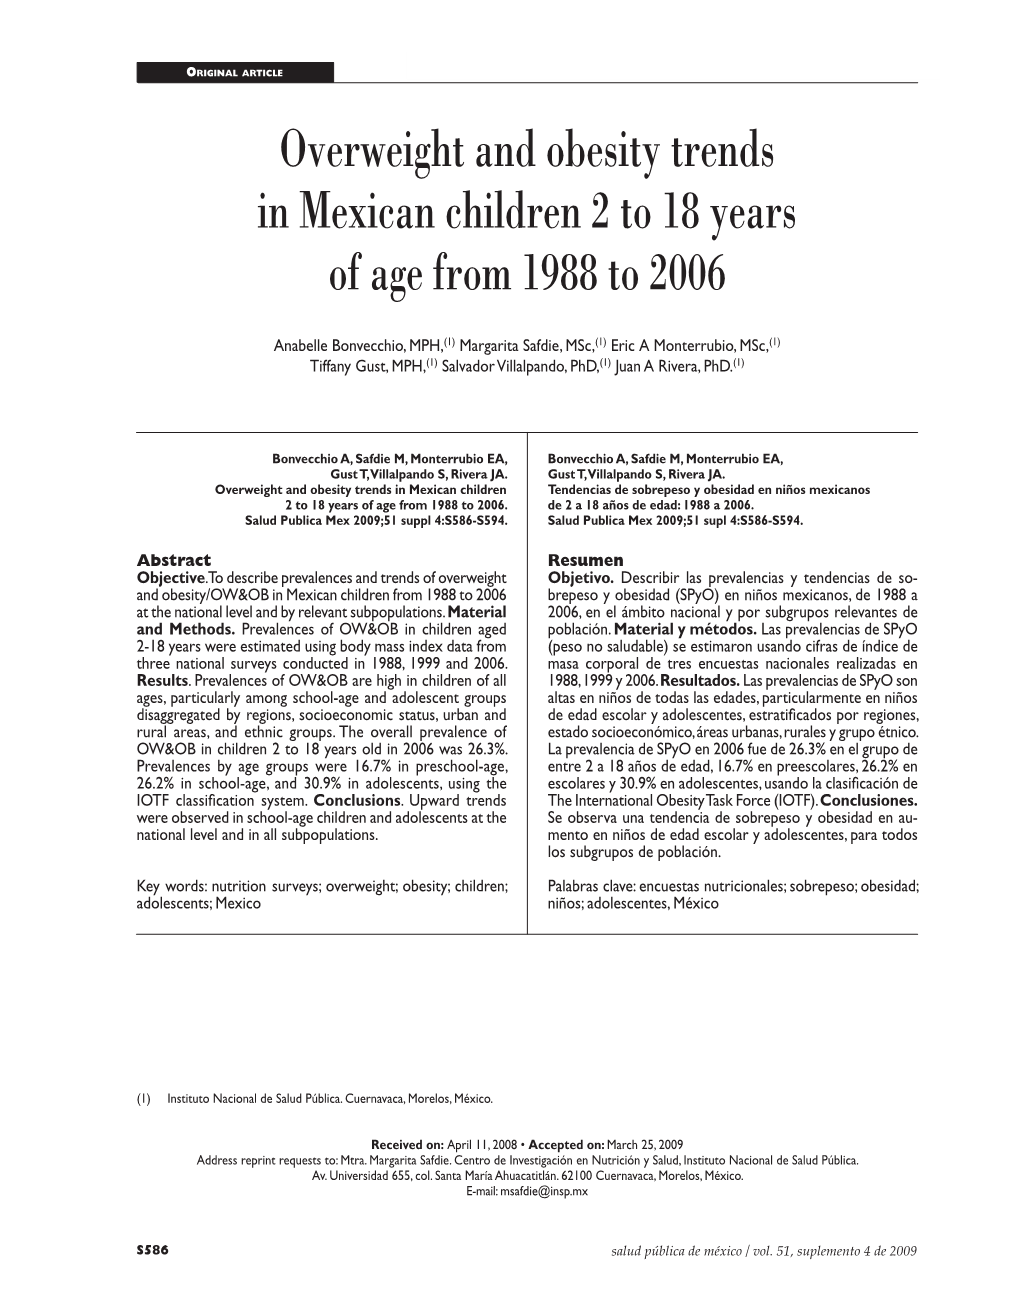 Overweight and Obesity Trends in Mexican Children 2 to 18 Years of Age from 1988 to 2006